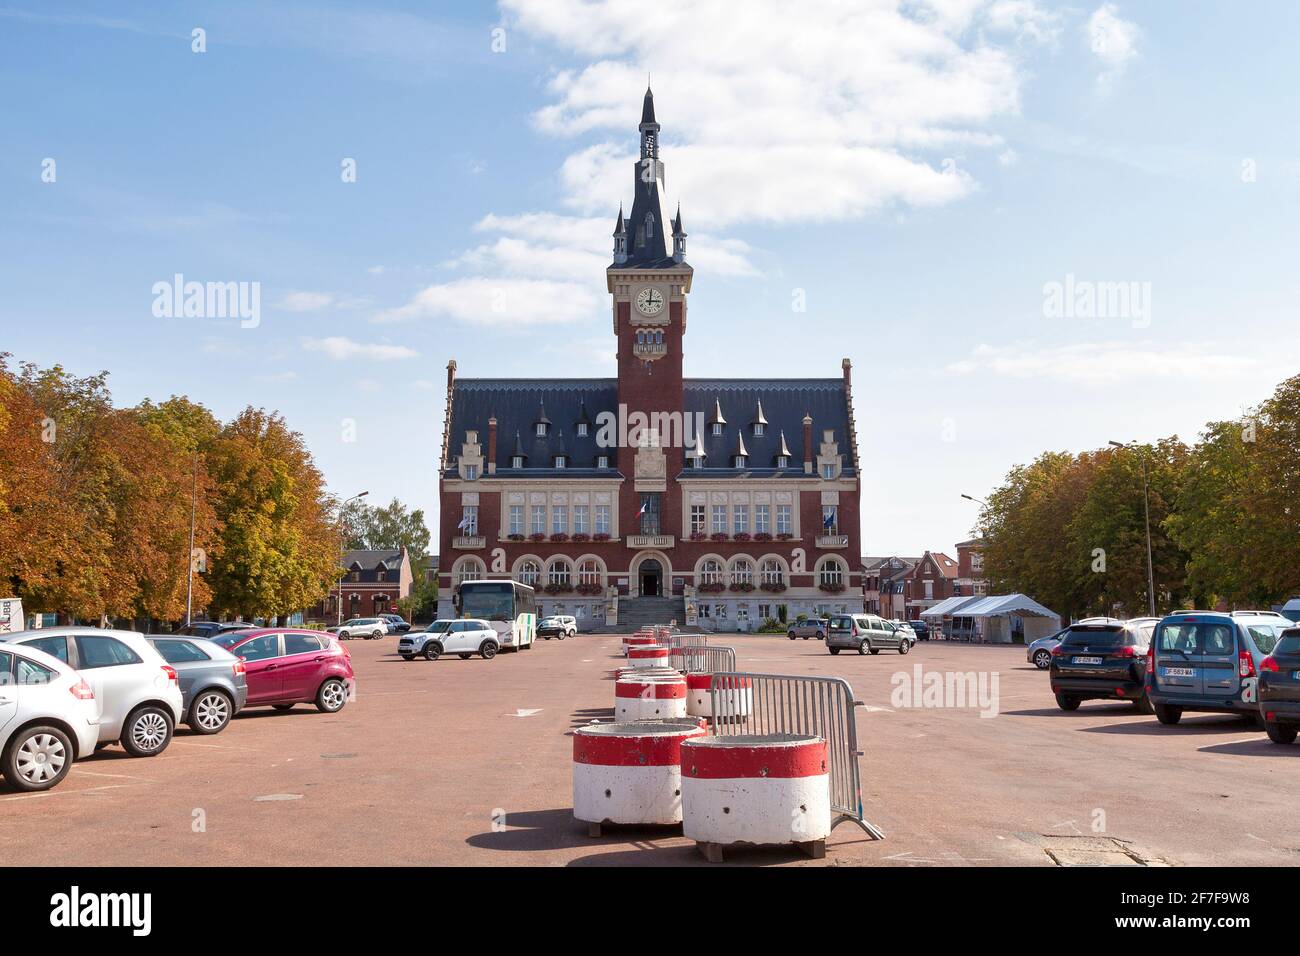 Albert, France - September 12 2020: The town hall inaugurated in 1932 was created by the architects Alexandre Miniac and Benjamin Maneval. It is surmo Stock Photo